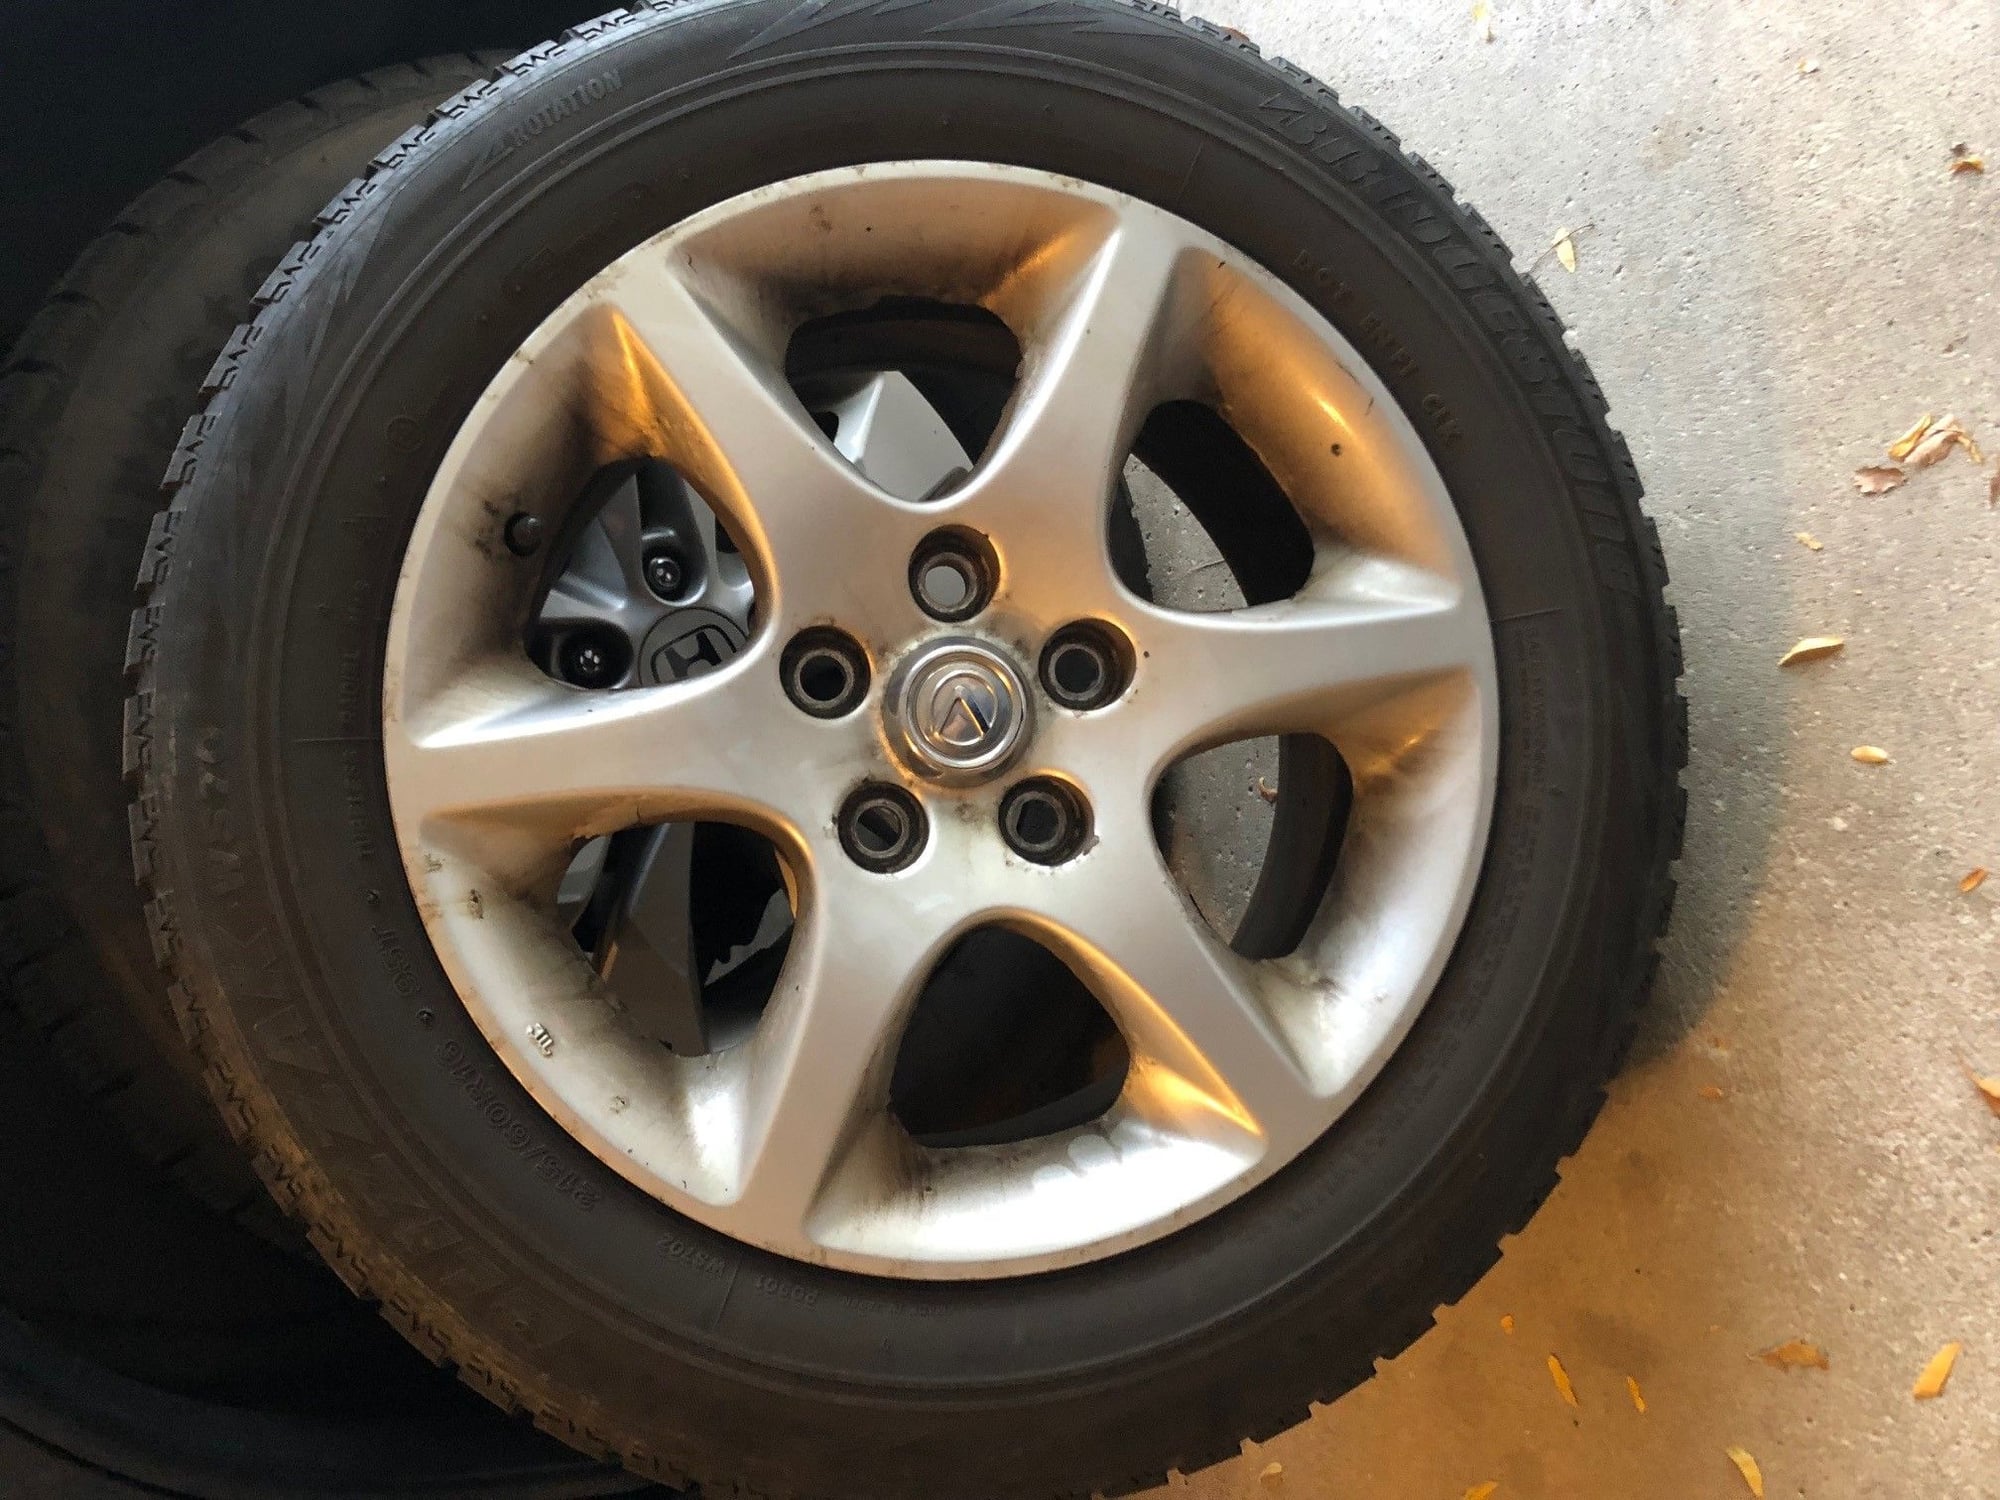 Wheels and Tires/Axles - IL 2004 Lexus GS 300 16 Inch Wheels and Blizzak Winter Tires 215/60/16 - Used - 1998 to 2005 Lexus GS300 - Northbrook, IL 60062, United States